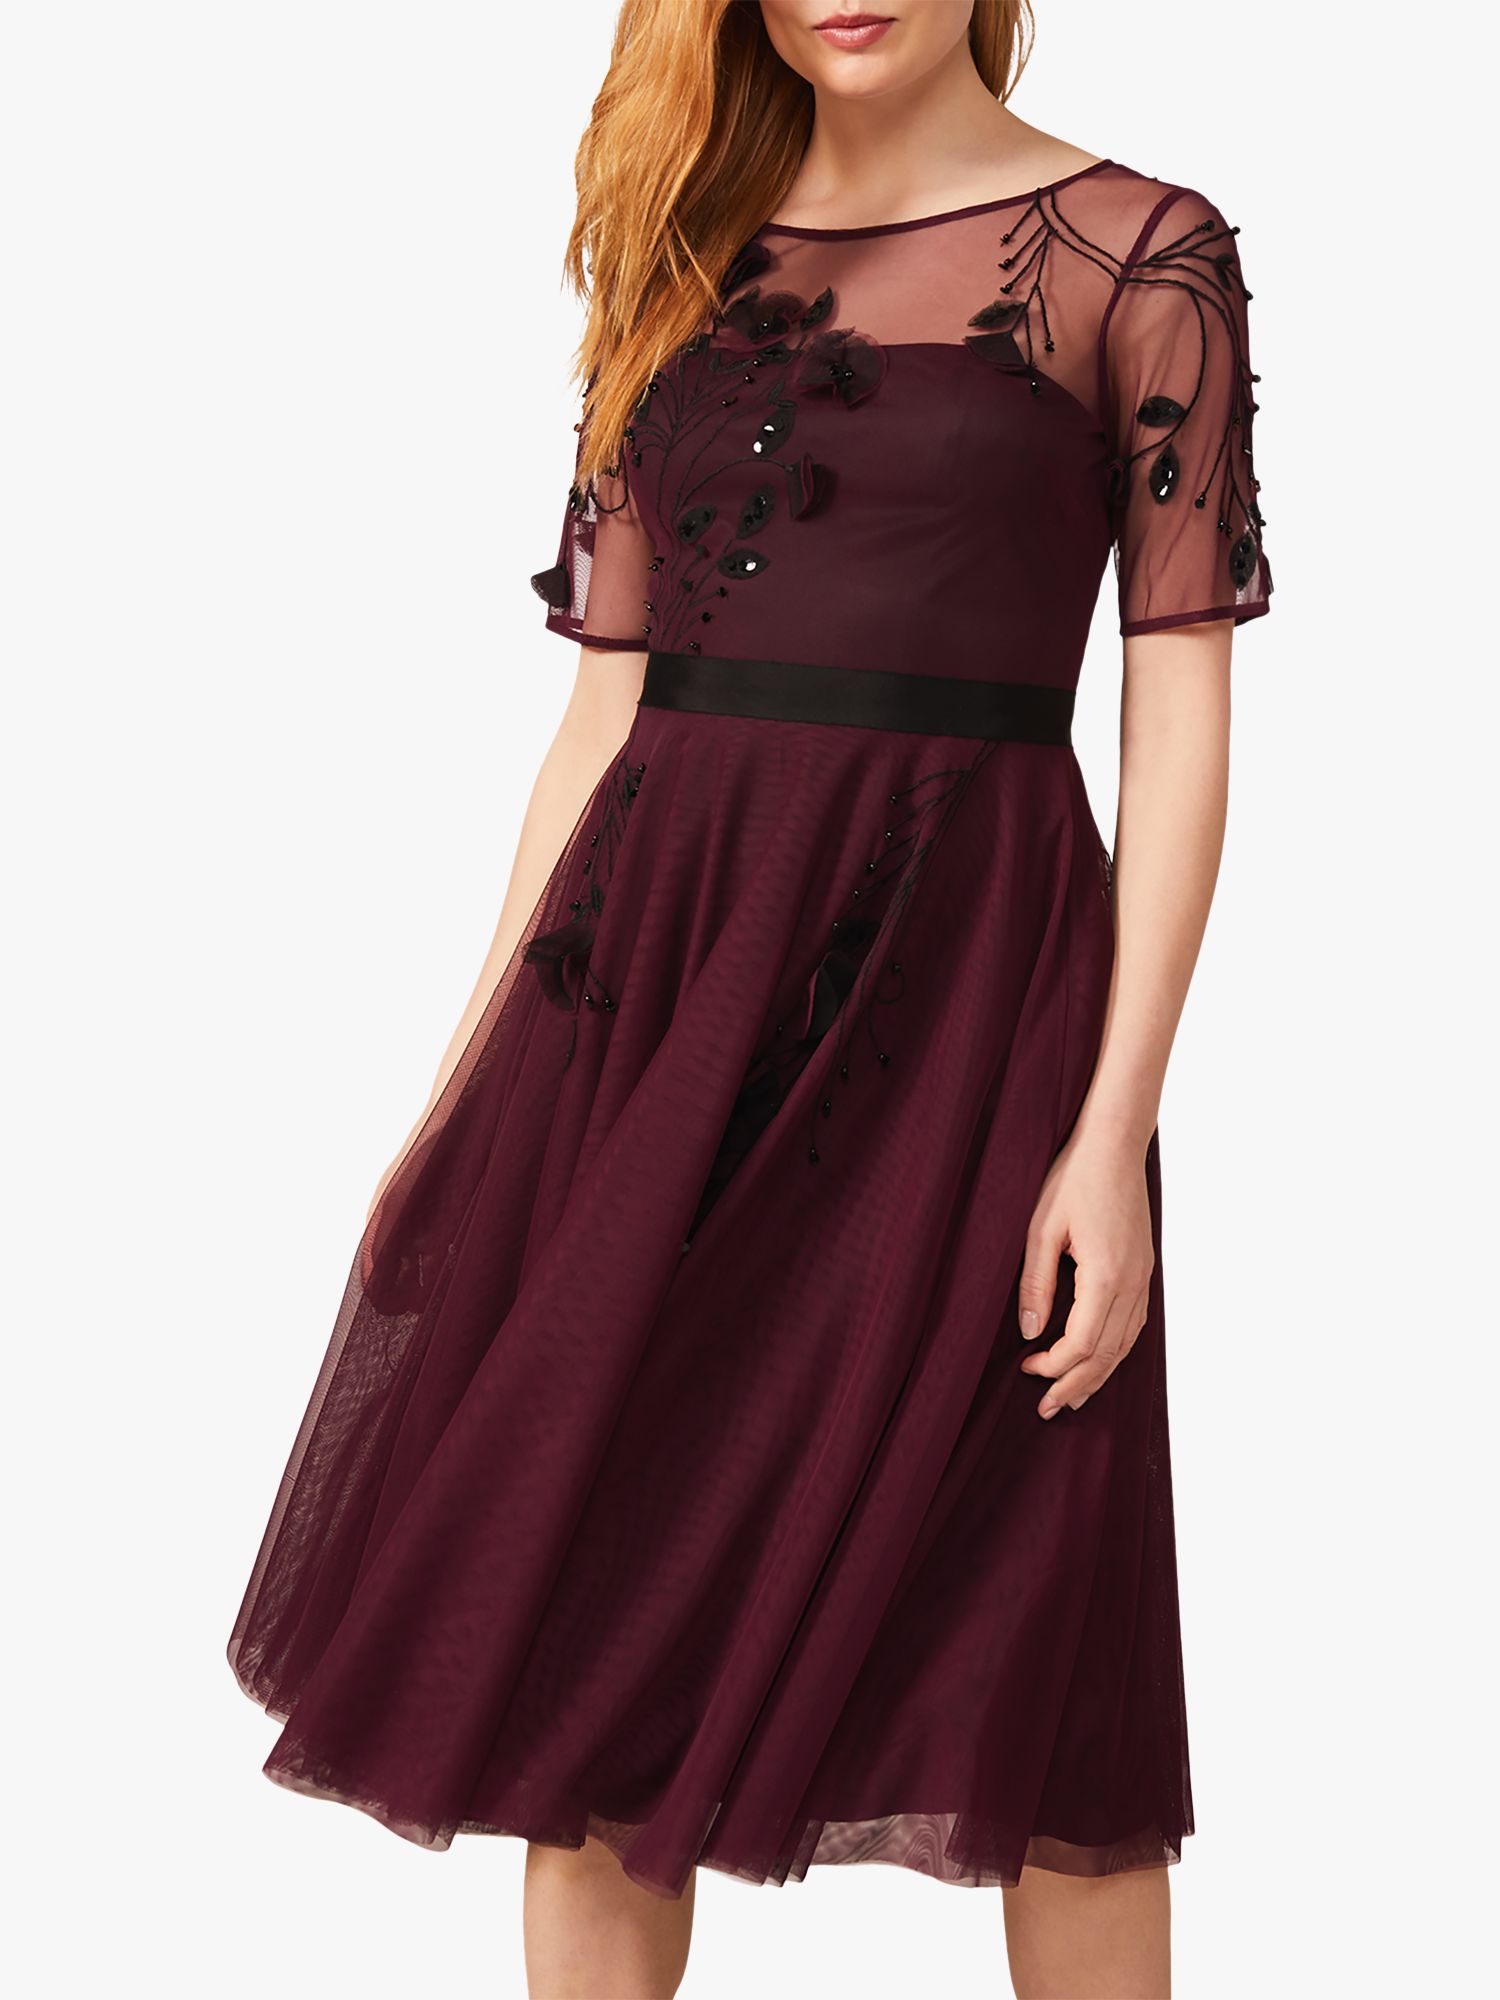 Phase Eight Collection 8 Felicia Embellished Floral Dress, Berry